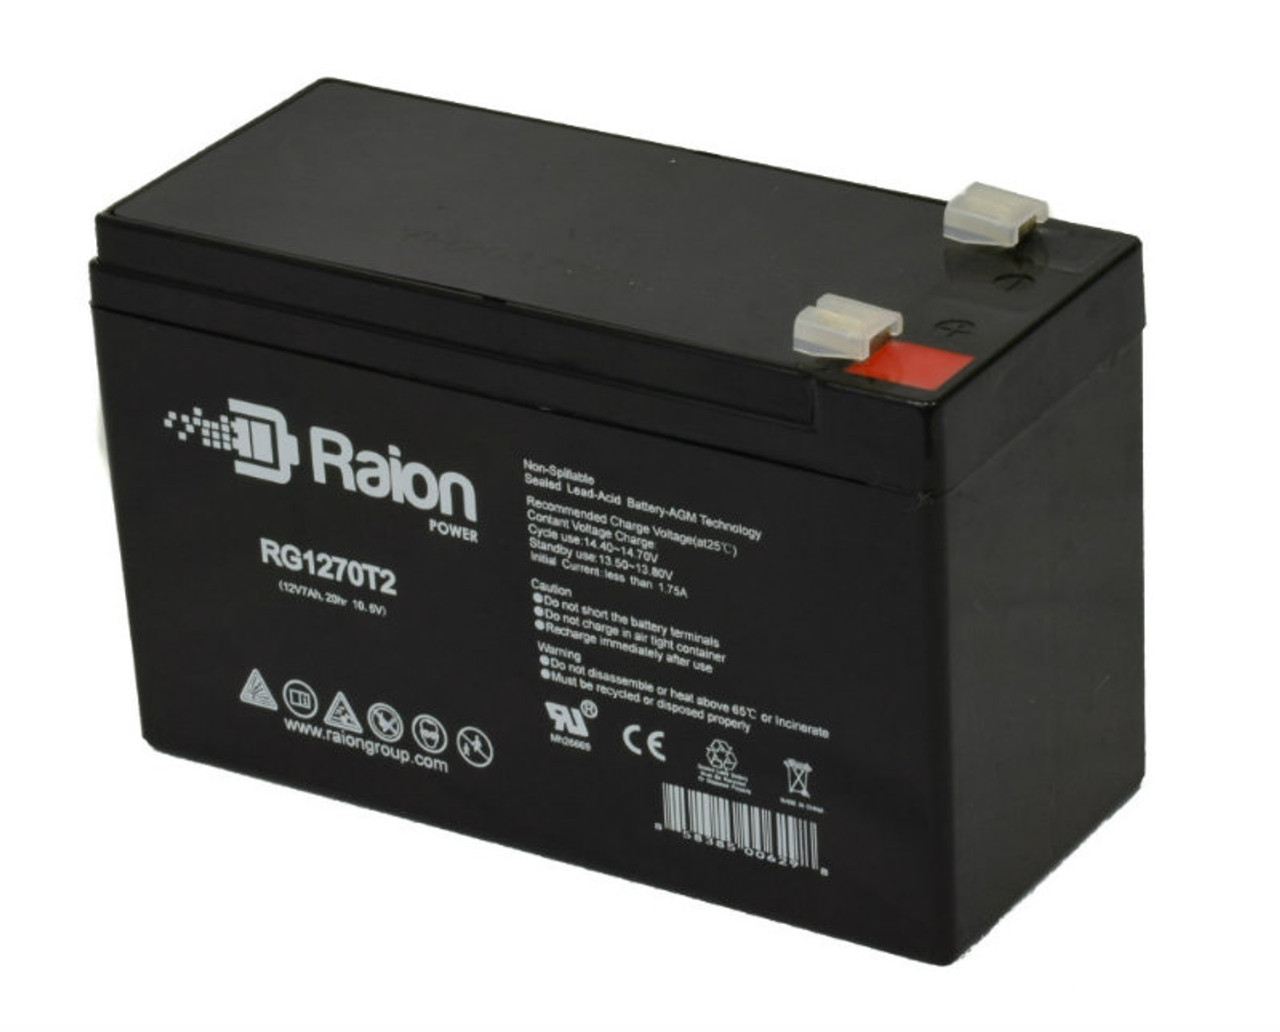 Raion Power RG1270T1 12V 7Ah Non-Spillable Replacement Battery for Panasonic LC-WTP127r2